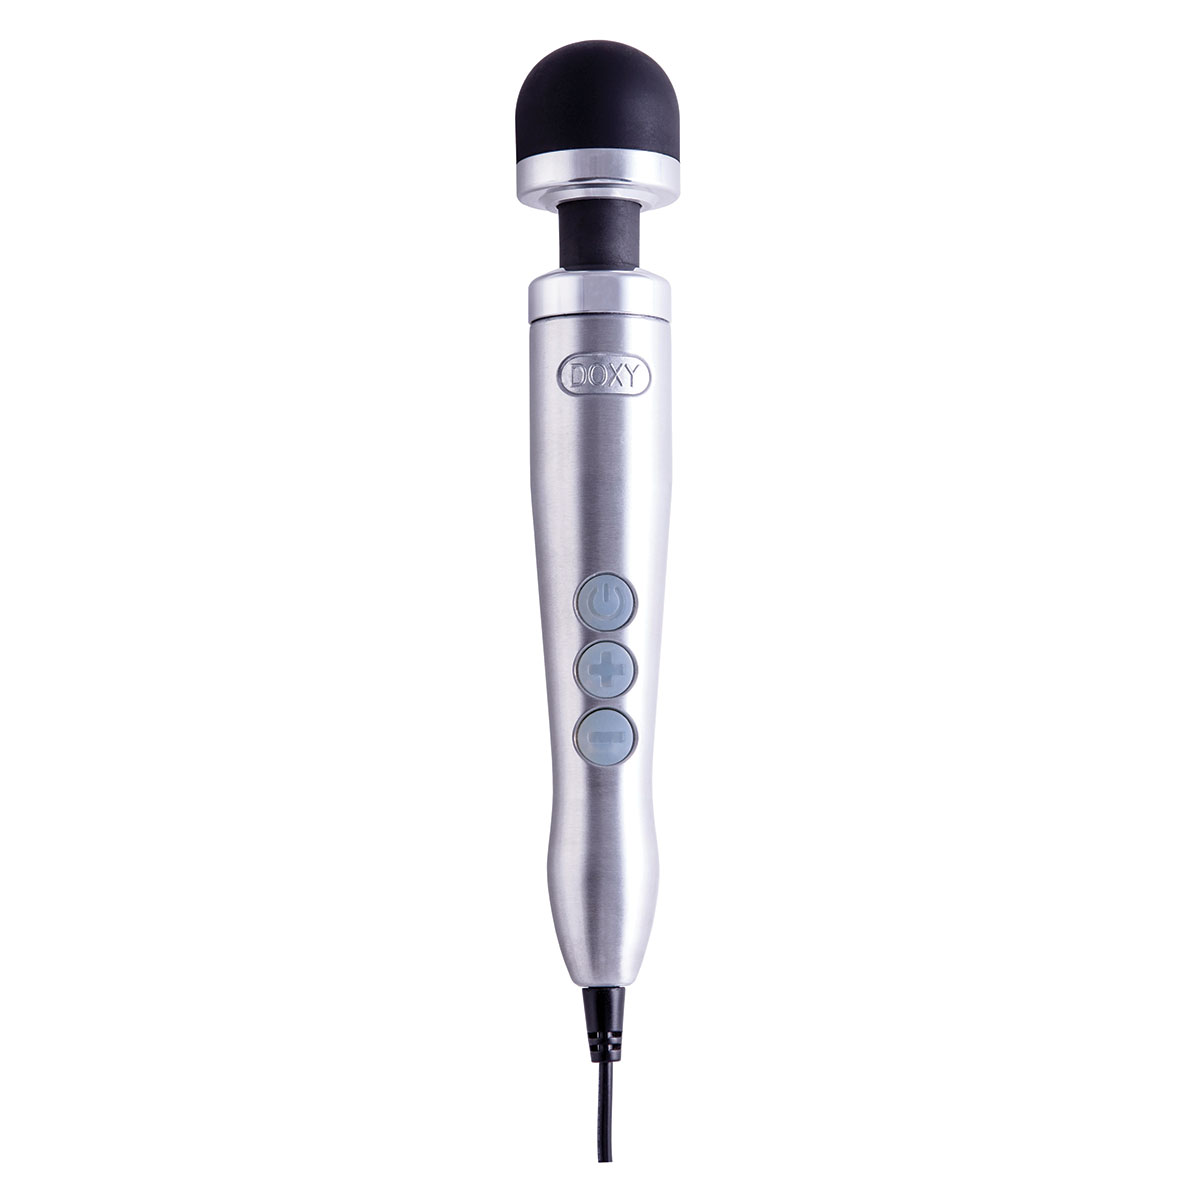 Doxy Die Cast 3 Compact Wand Vibrator Brushed Metal - image 1 of 2